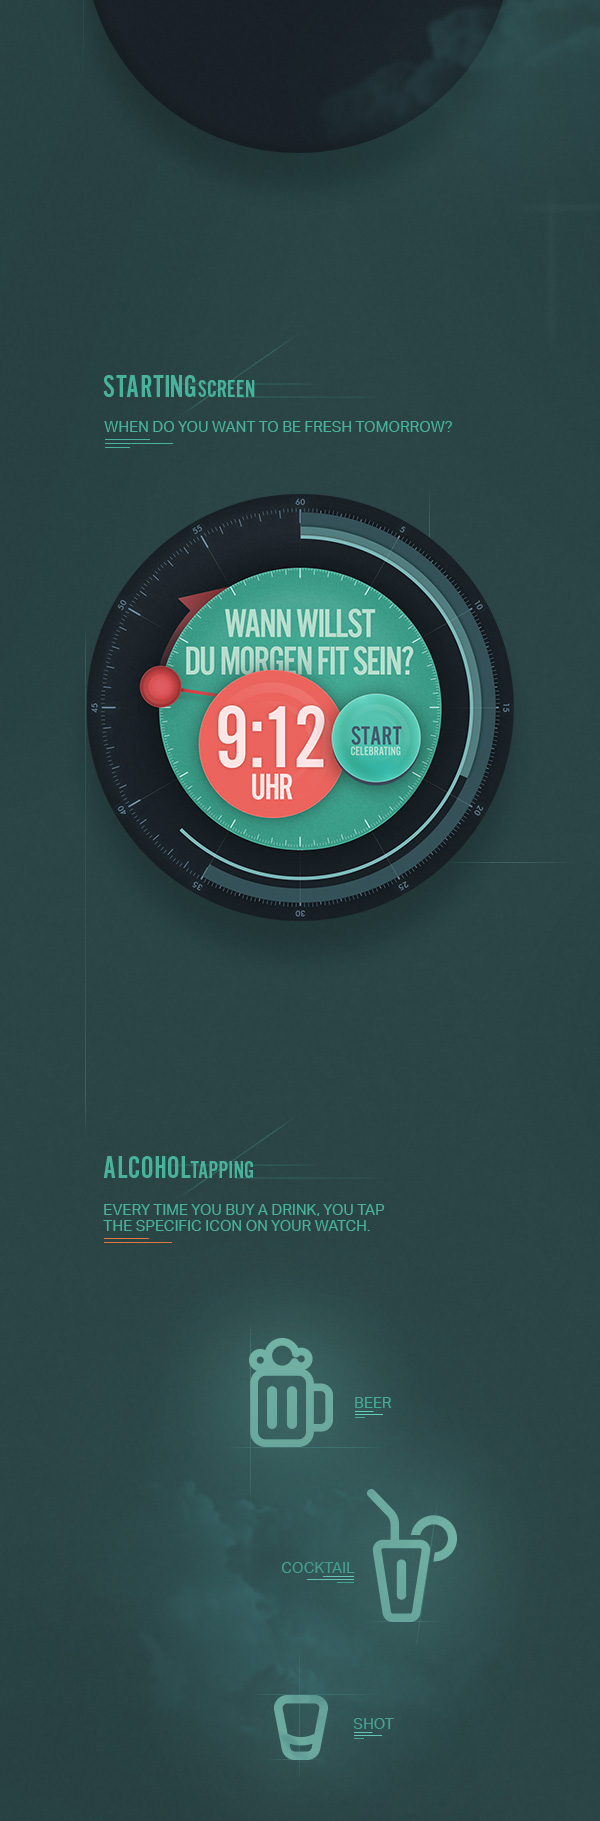 smartwatch Moto 360 app concept application cocktail alcohol beer shot design user interface iwatch watch control sober